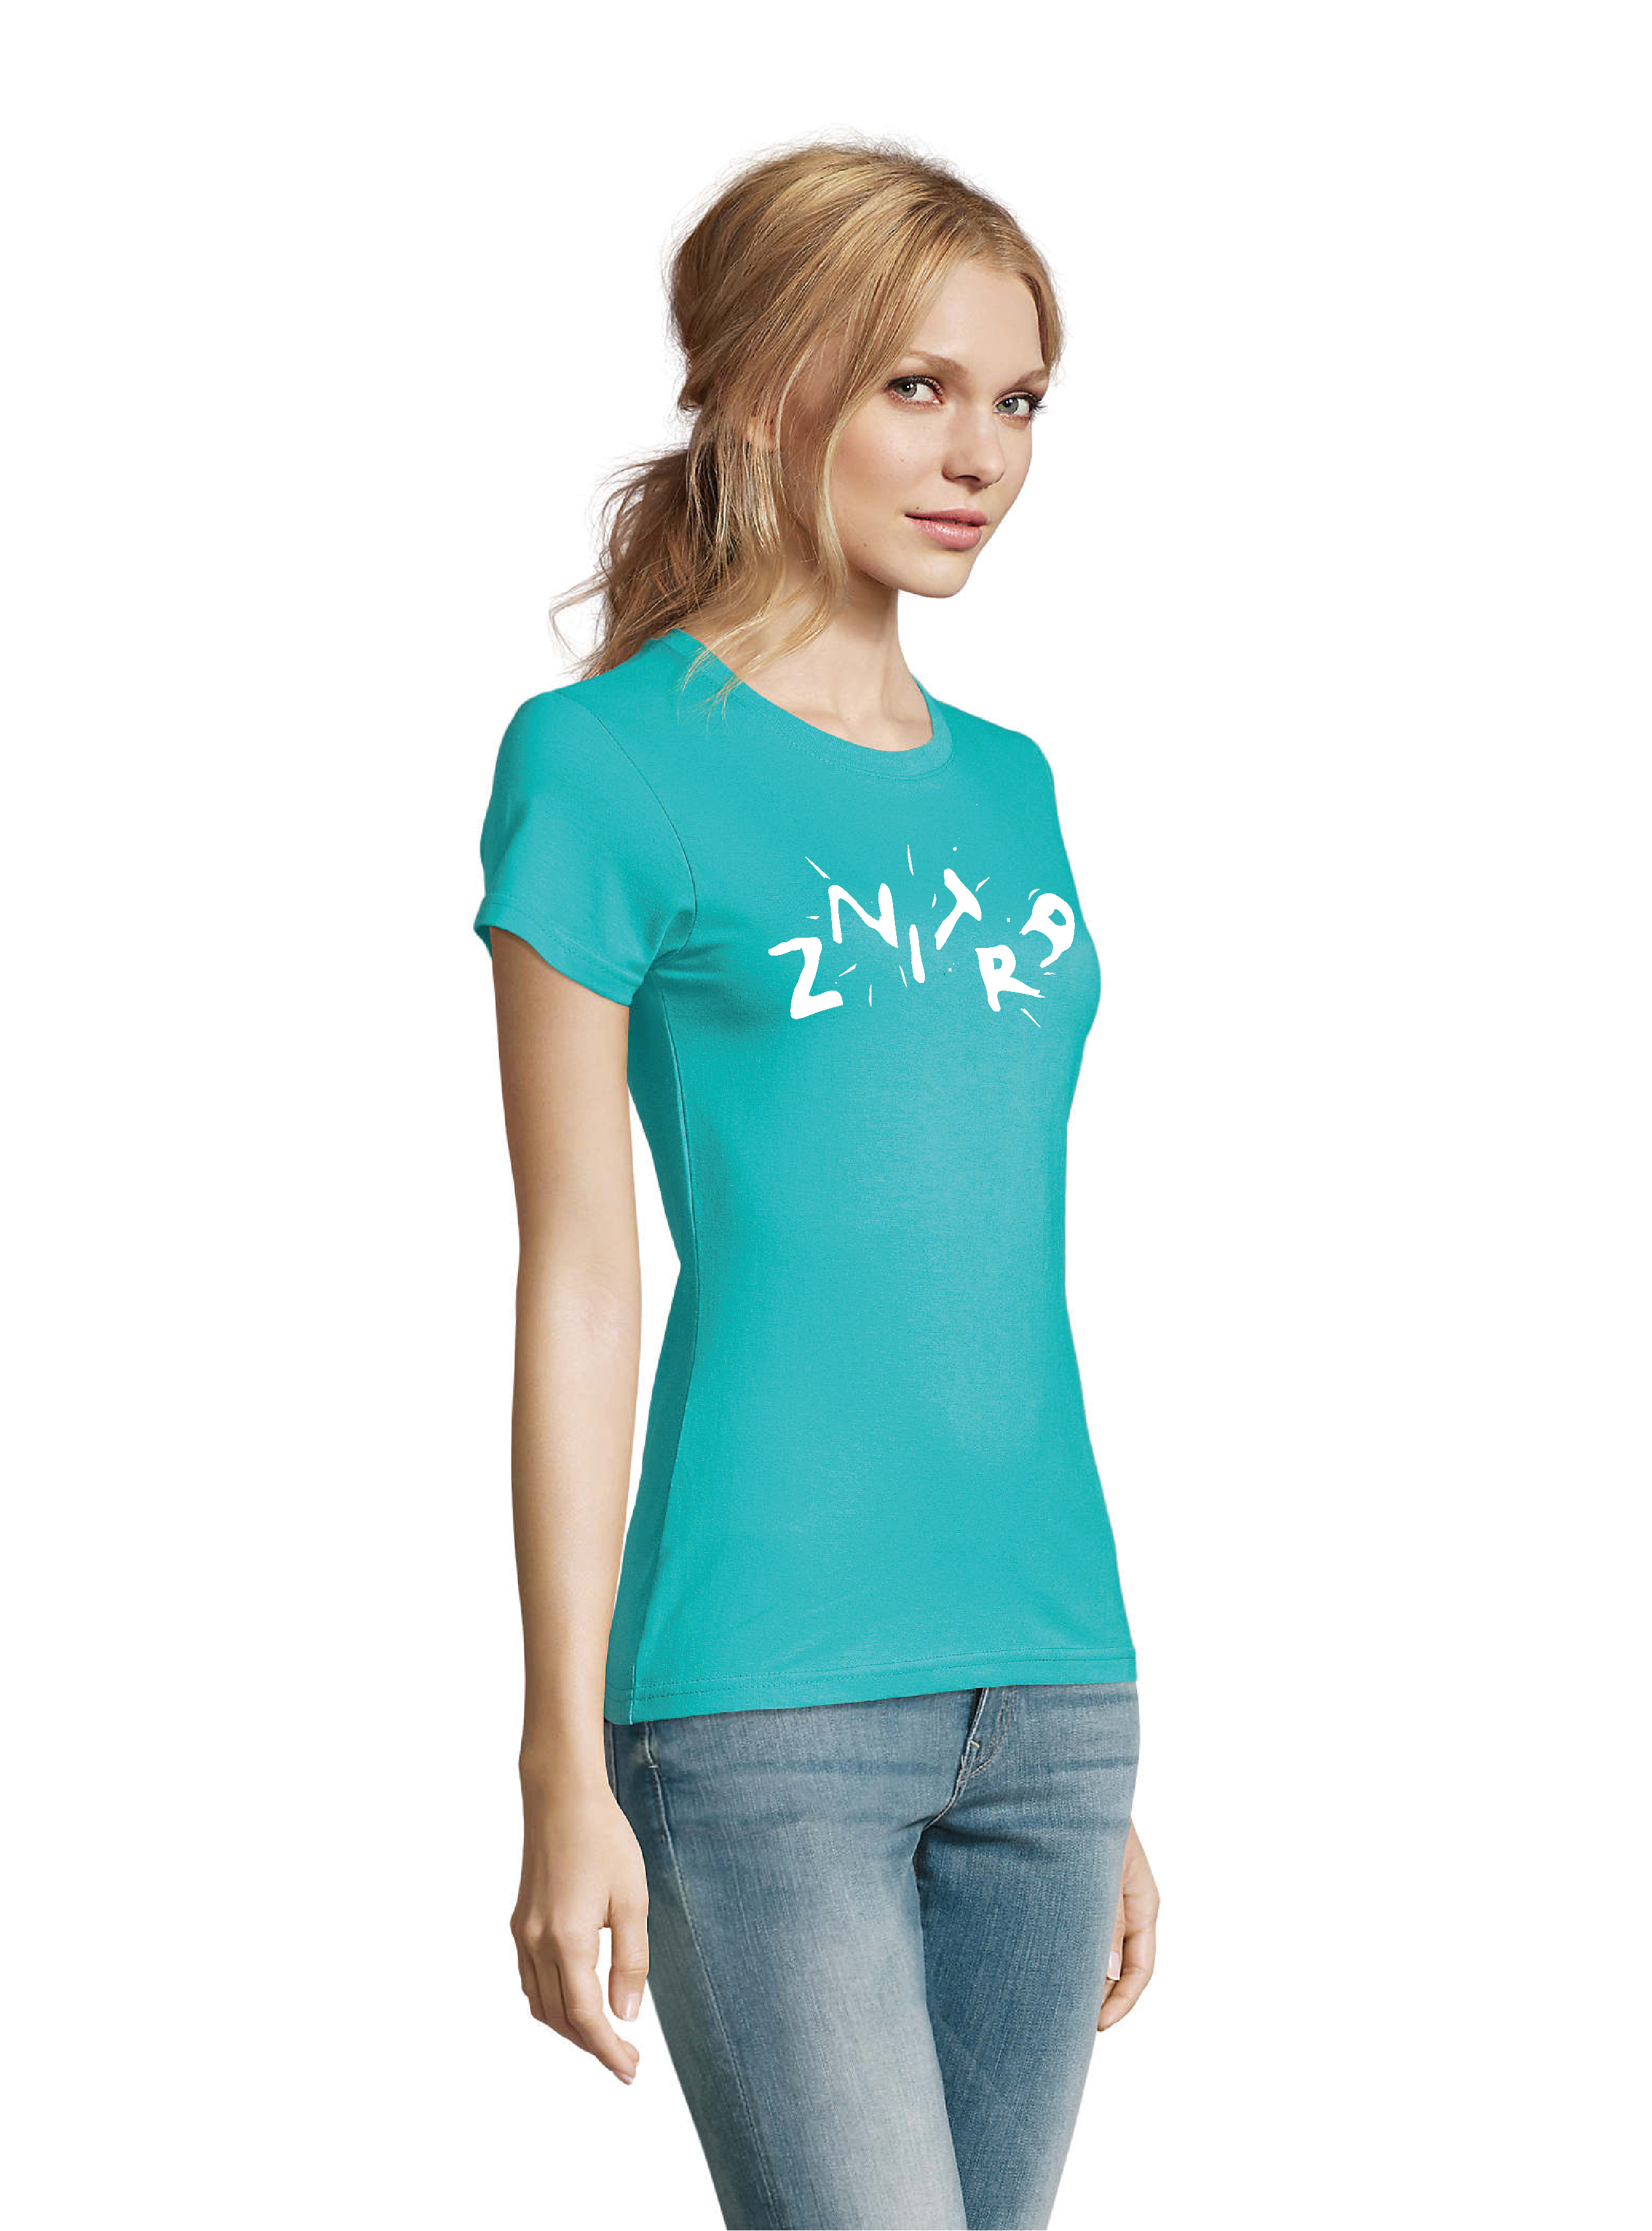 woman tshirt turquoise color side